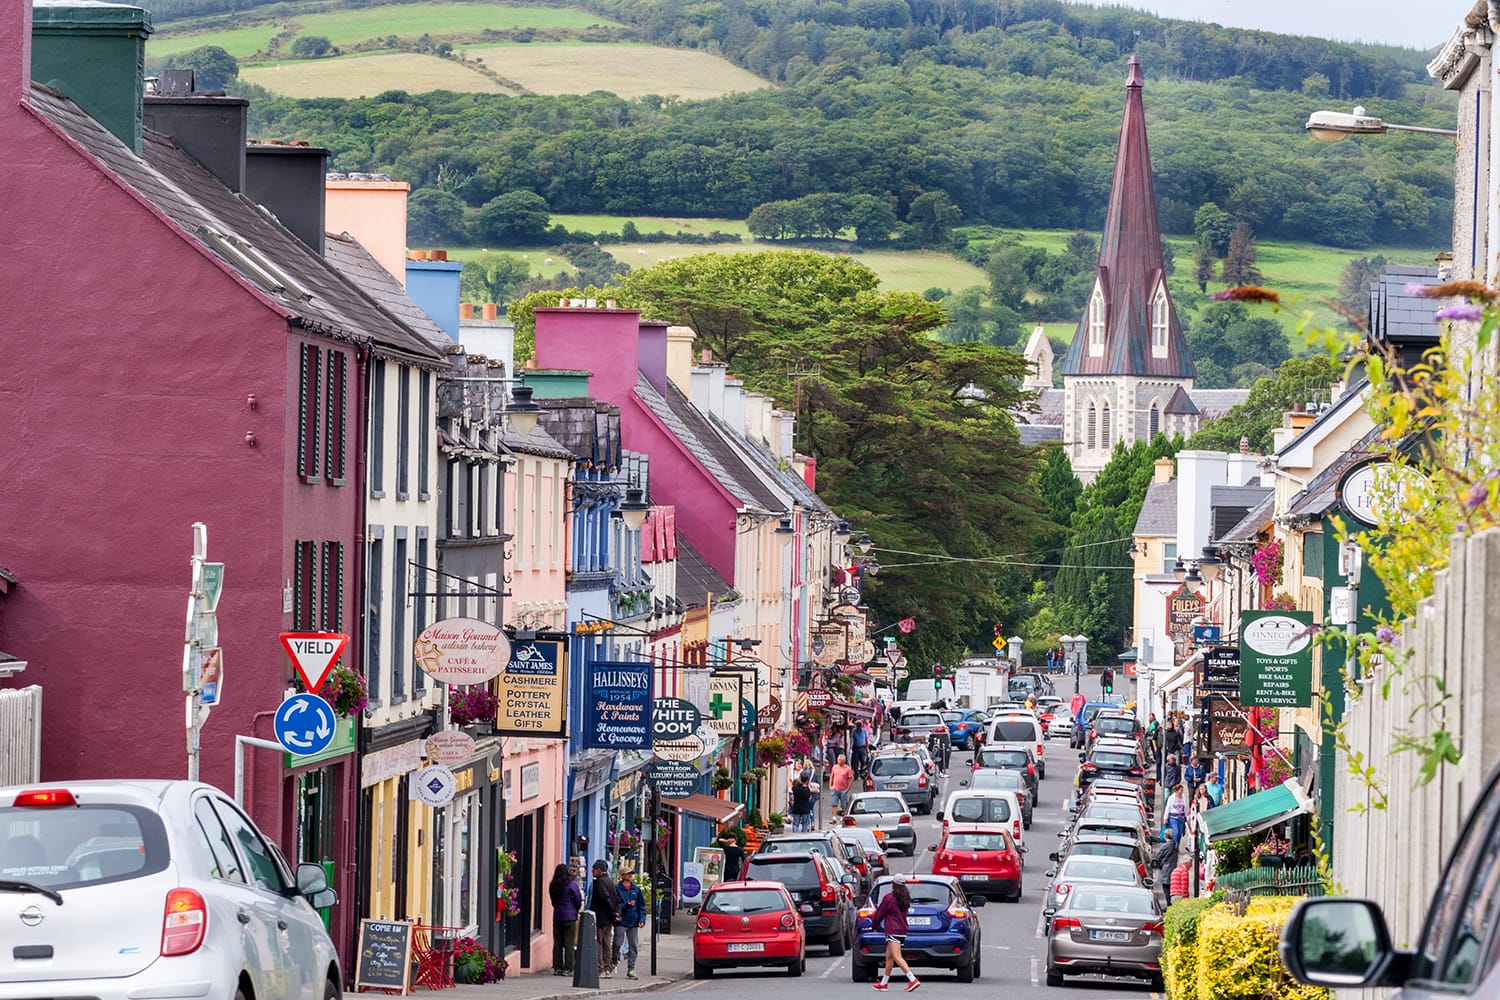 Pubs, bars and restaurant on Henry street in the tourist destination town of Kenmare, Ireland